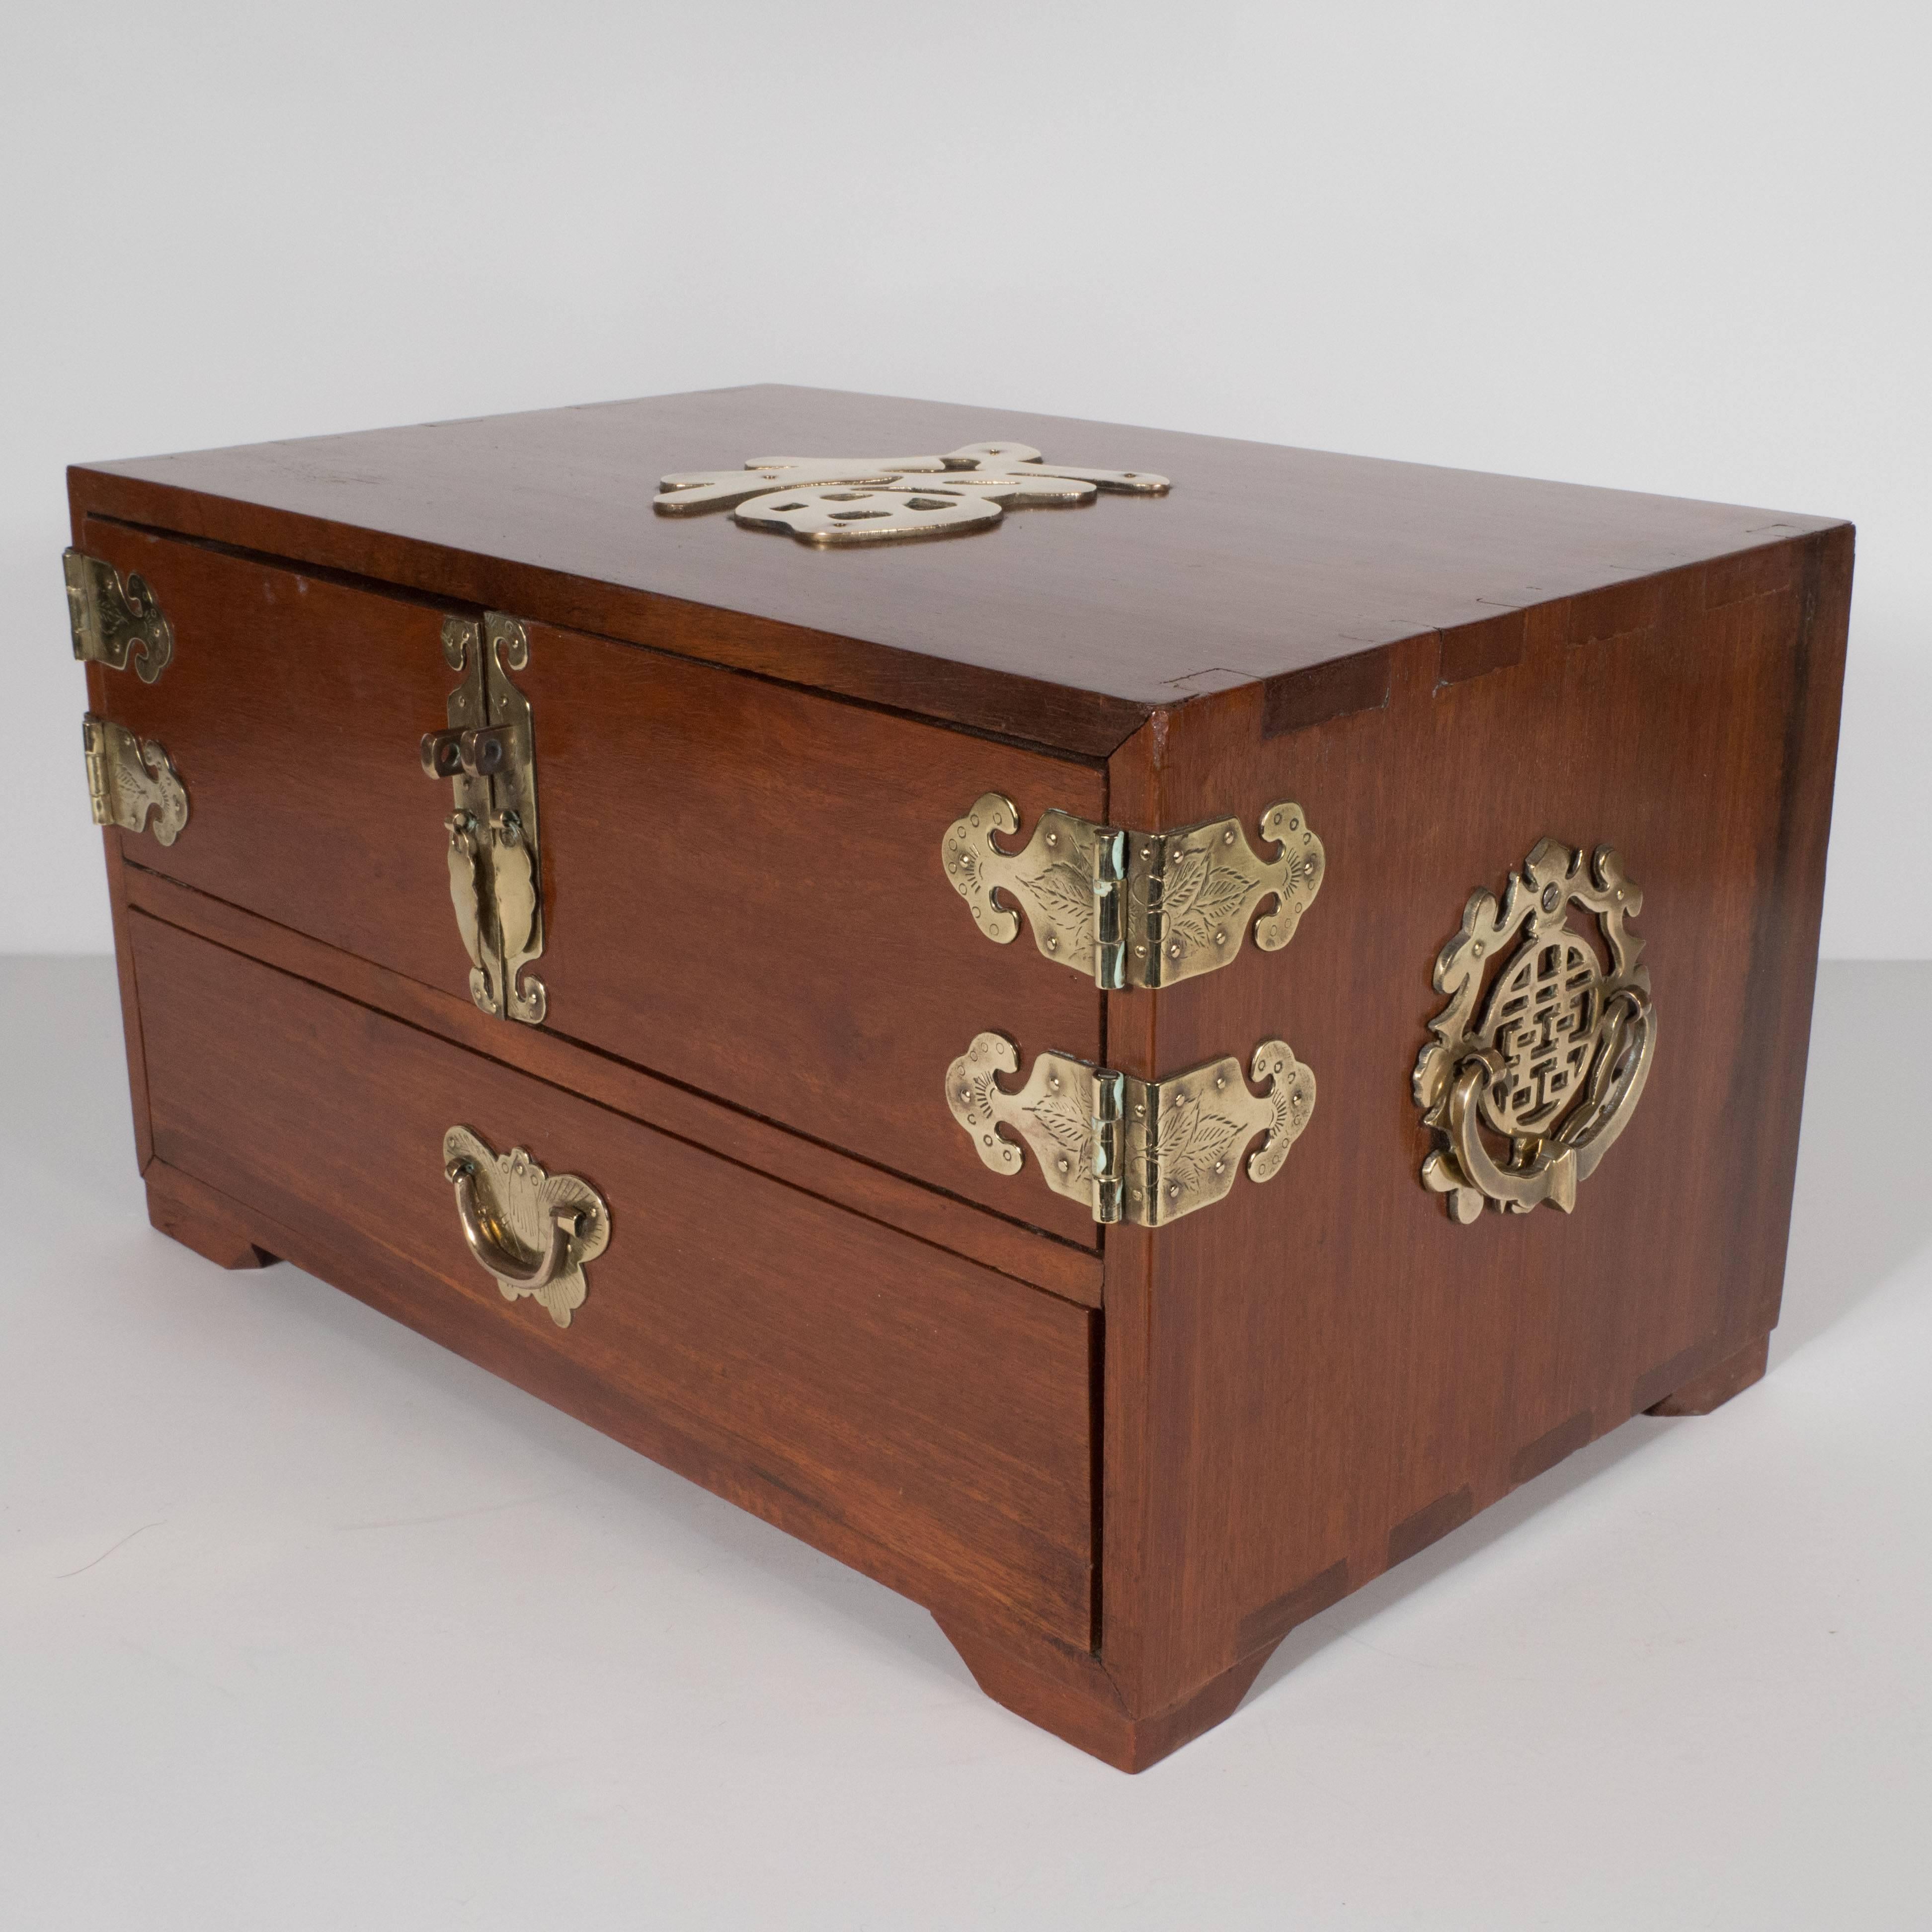 Chinese Export Mid-Century Modern Rosewood Chinese Jewelry Box with Brass Hardware